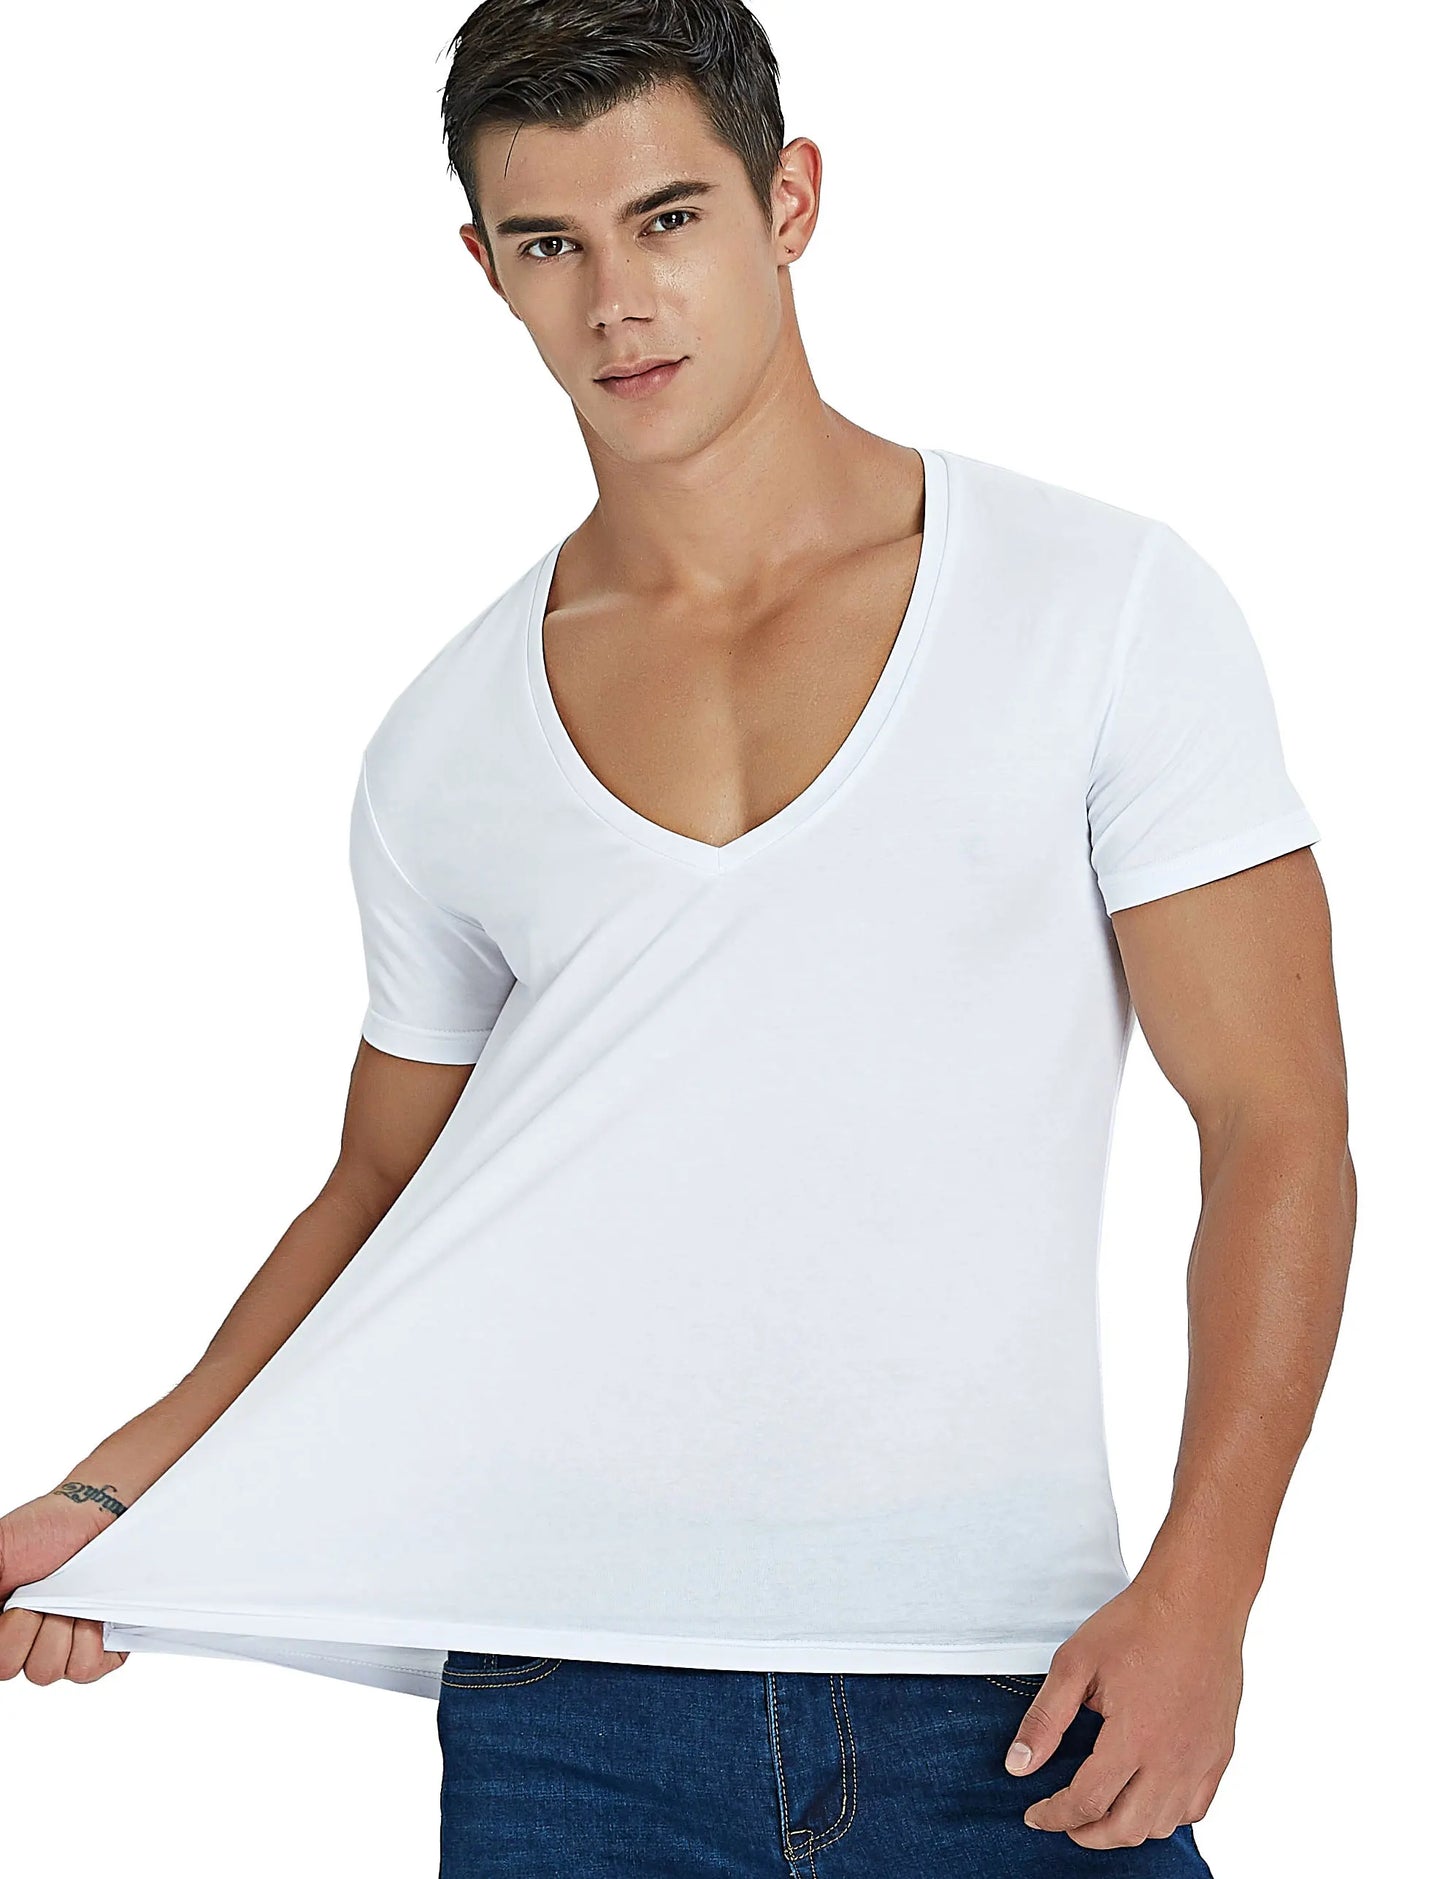 Stretch Deep V Neck T Shirt for Men Low Cut Vneck Vee Top Tees Slim Fit Short Sleeve Fashion Male Tshirt Invisible Undershirt